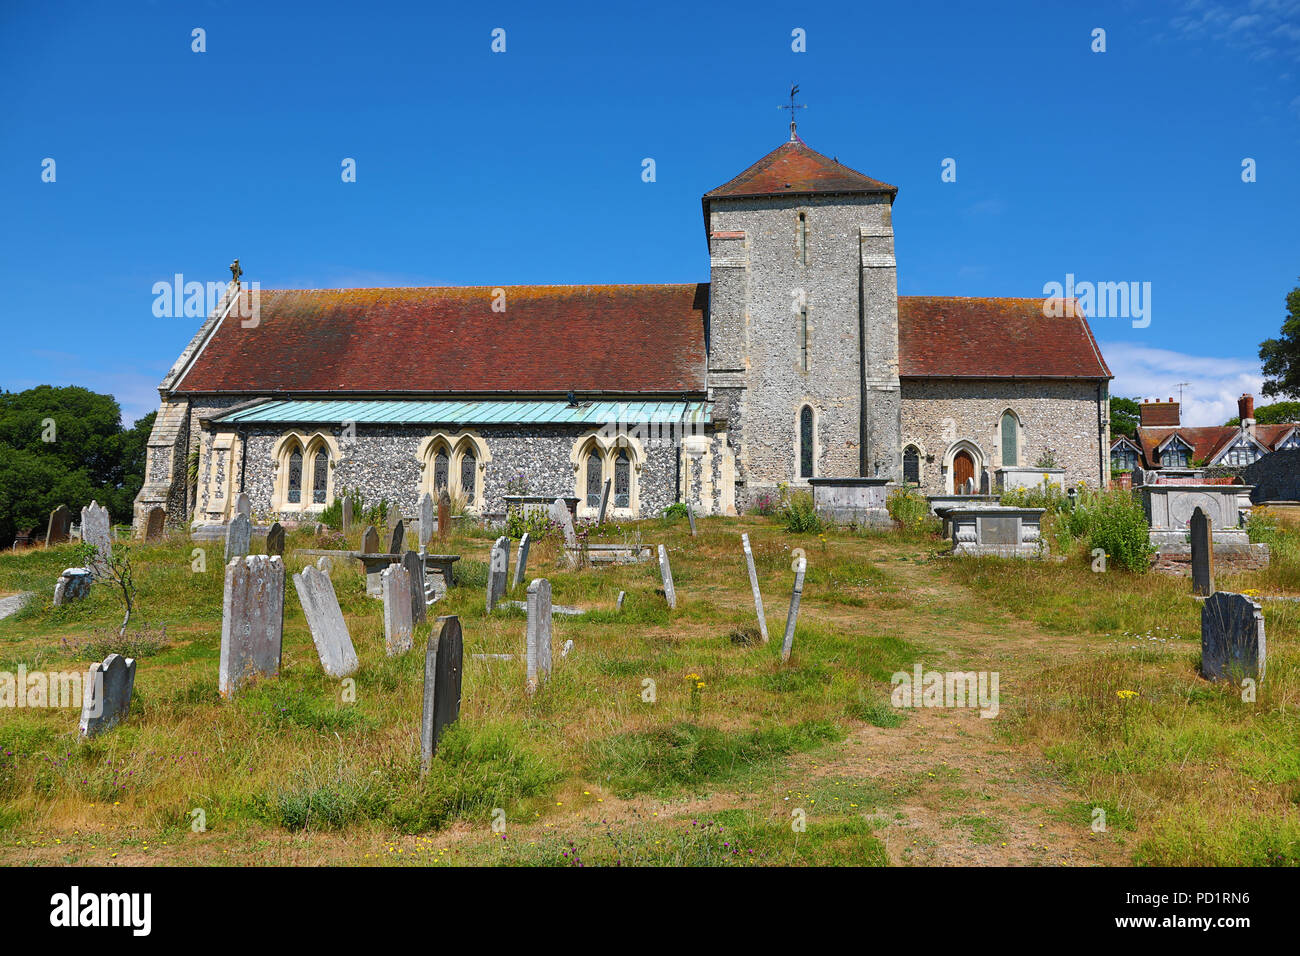 St Margaret's Church and graveyard in the village of Rottingdean, East Sussex, England, United Kingdom Stock Photo